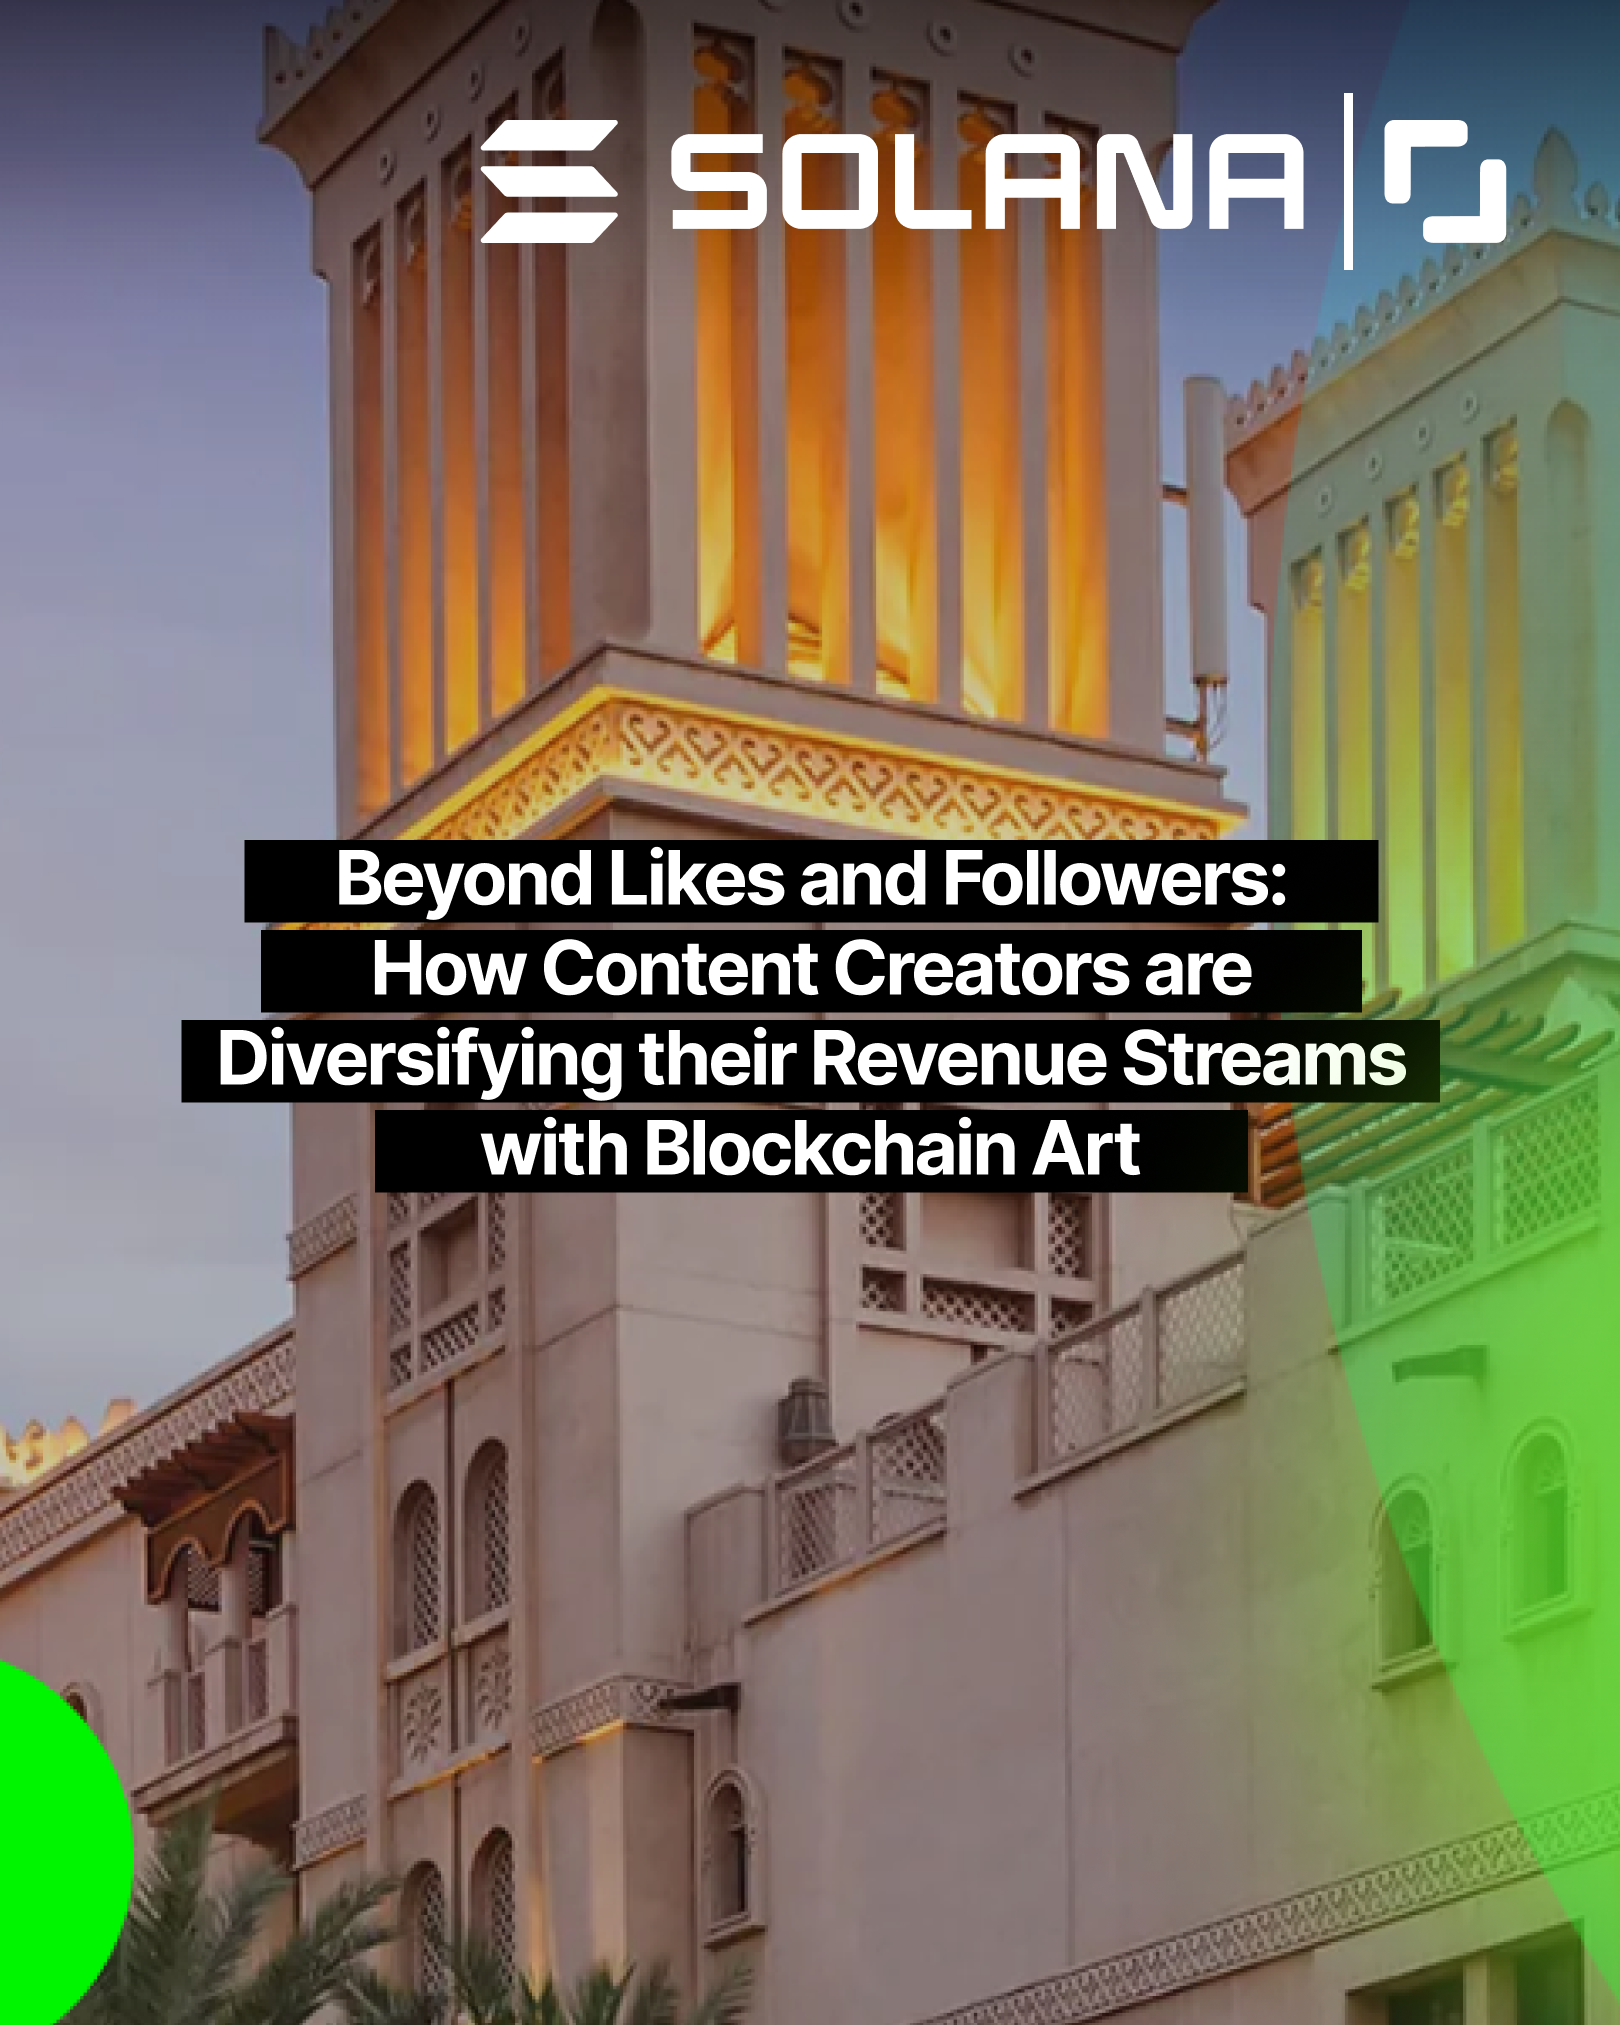 Beyond Likes and Followers: How Content Creators are Diversifying their Revenue Streams with Blockchain Art